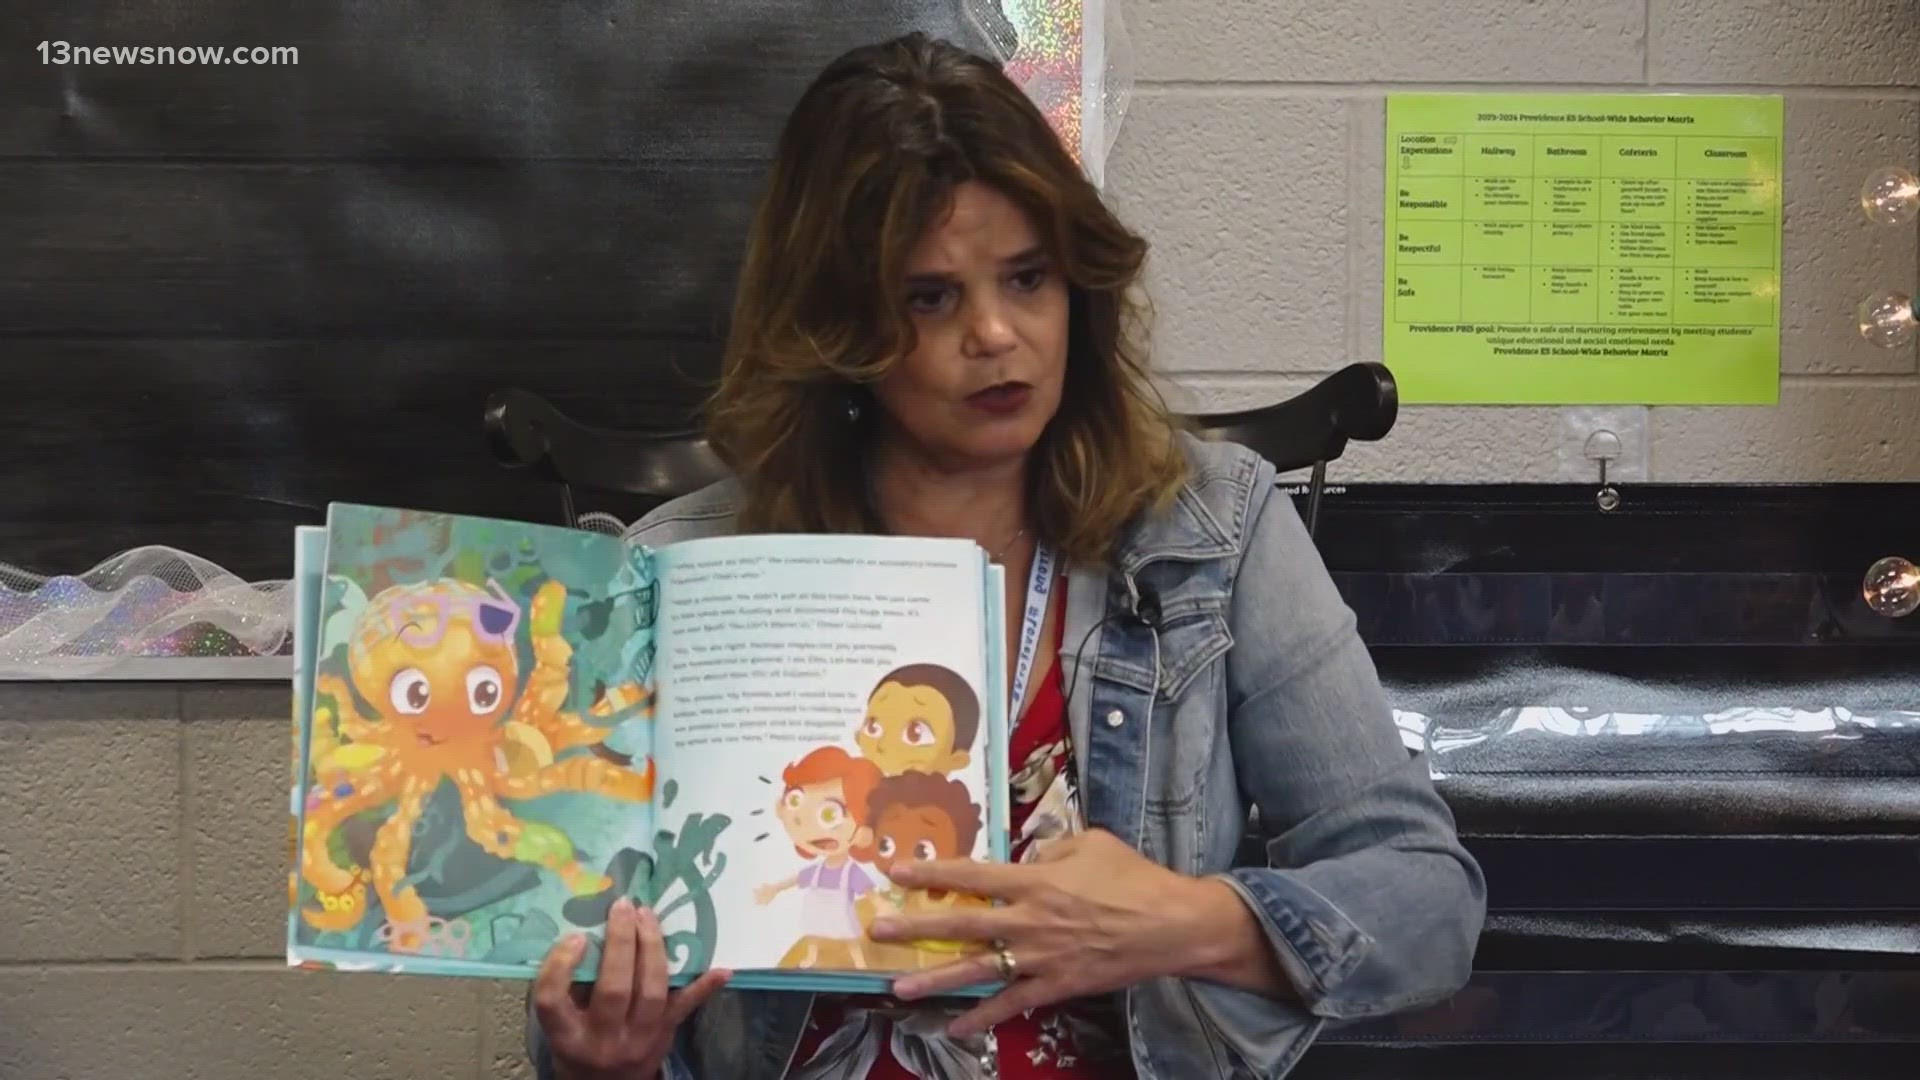 Gina Giordano's book, Otis the Trash-Talking Octopus, is inspiring children to make a difference by taking better care of the environment.